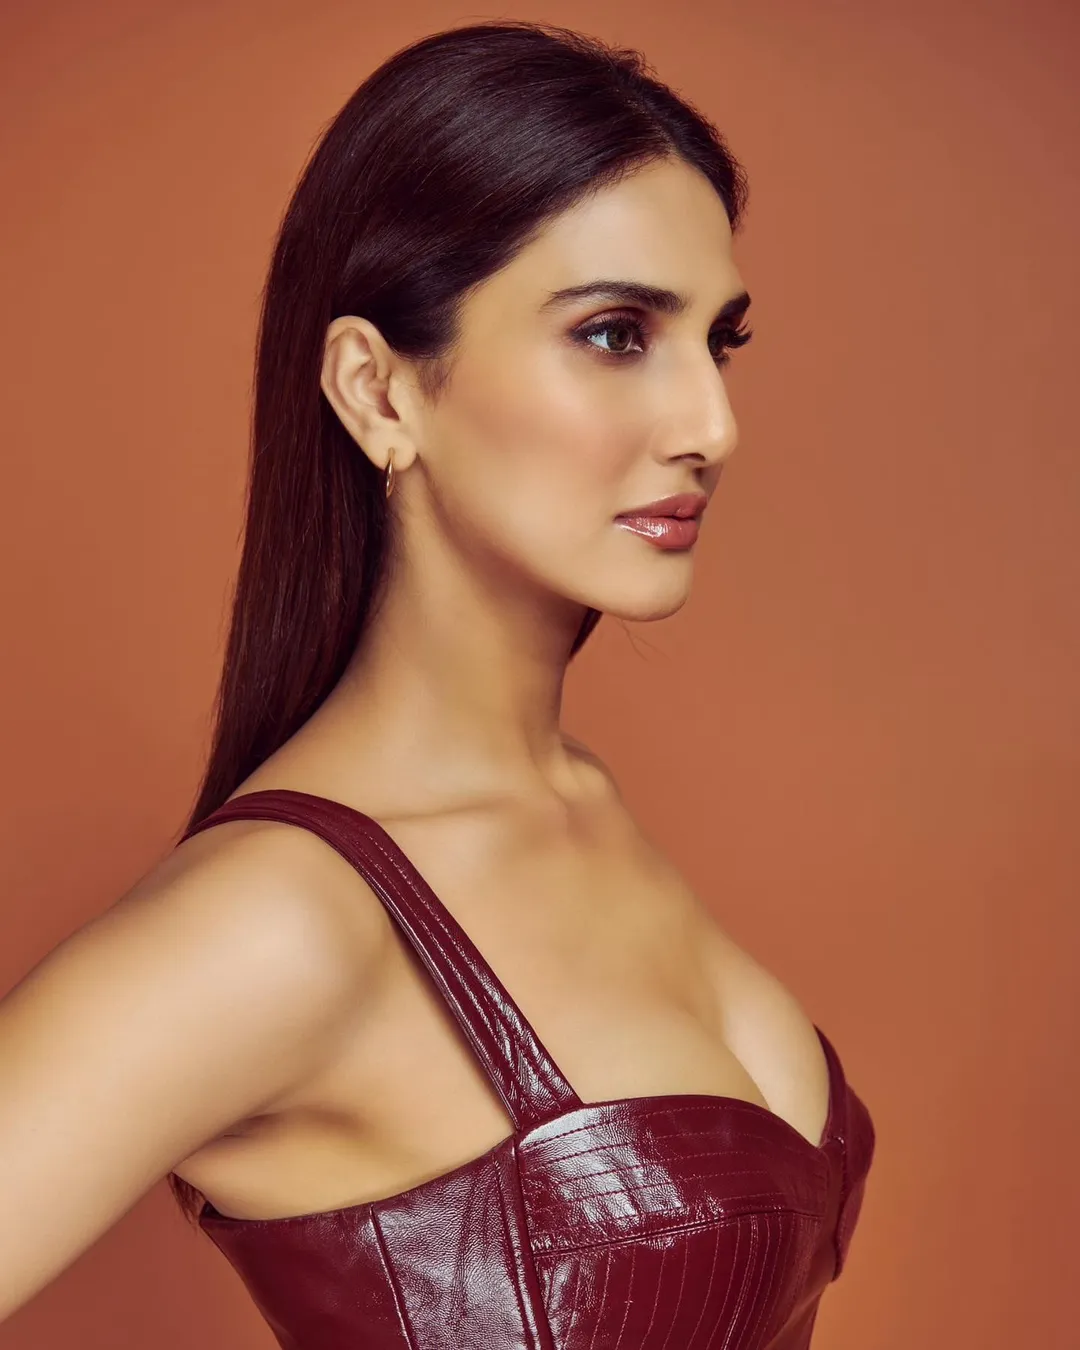 Vaani Kapoor cuts a striking figure in the cleavage-baring outfit